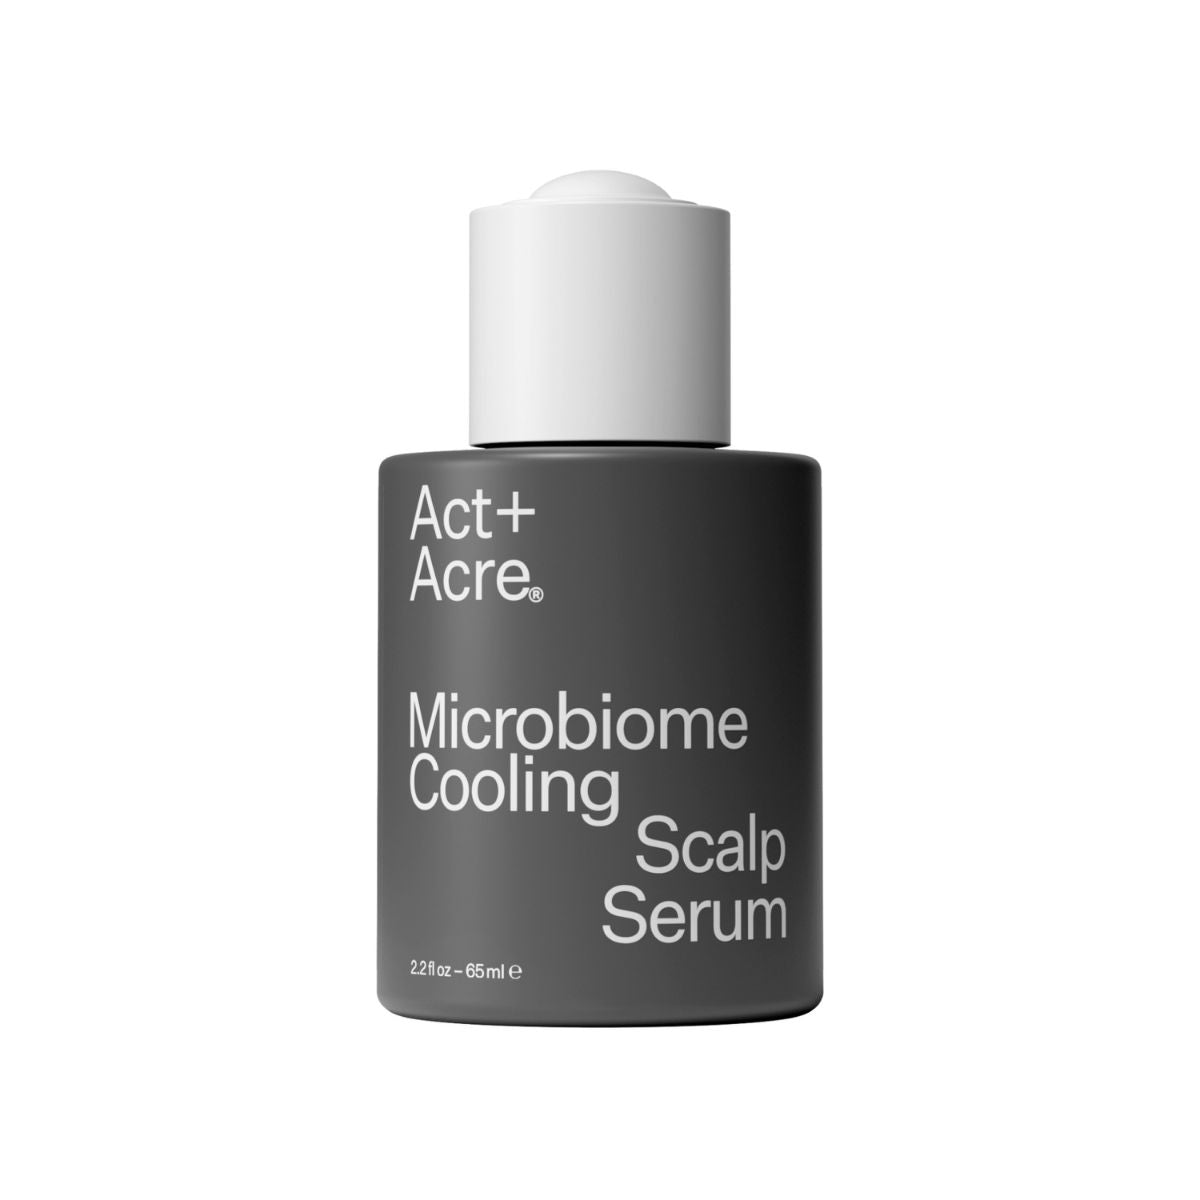 Act + Acre Microbiome Cooling Scalp Serum